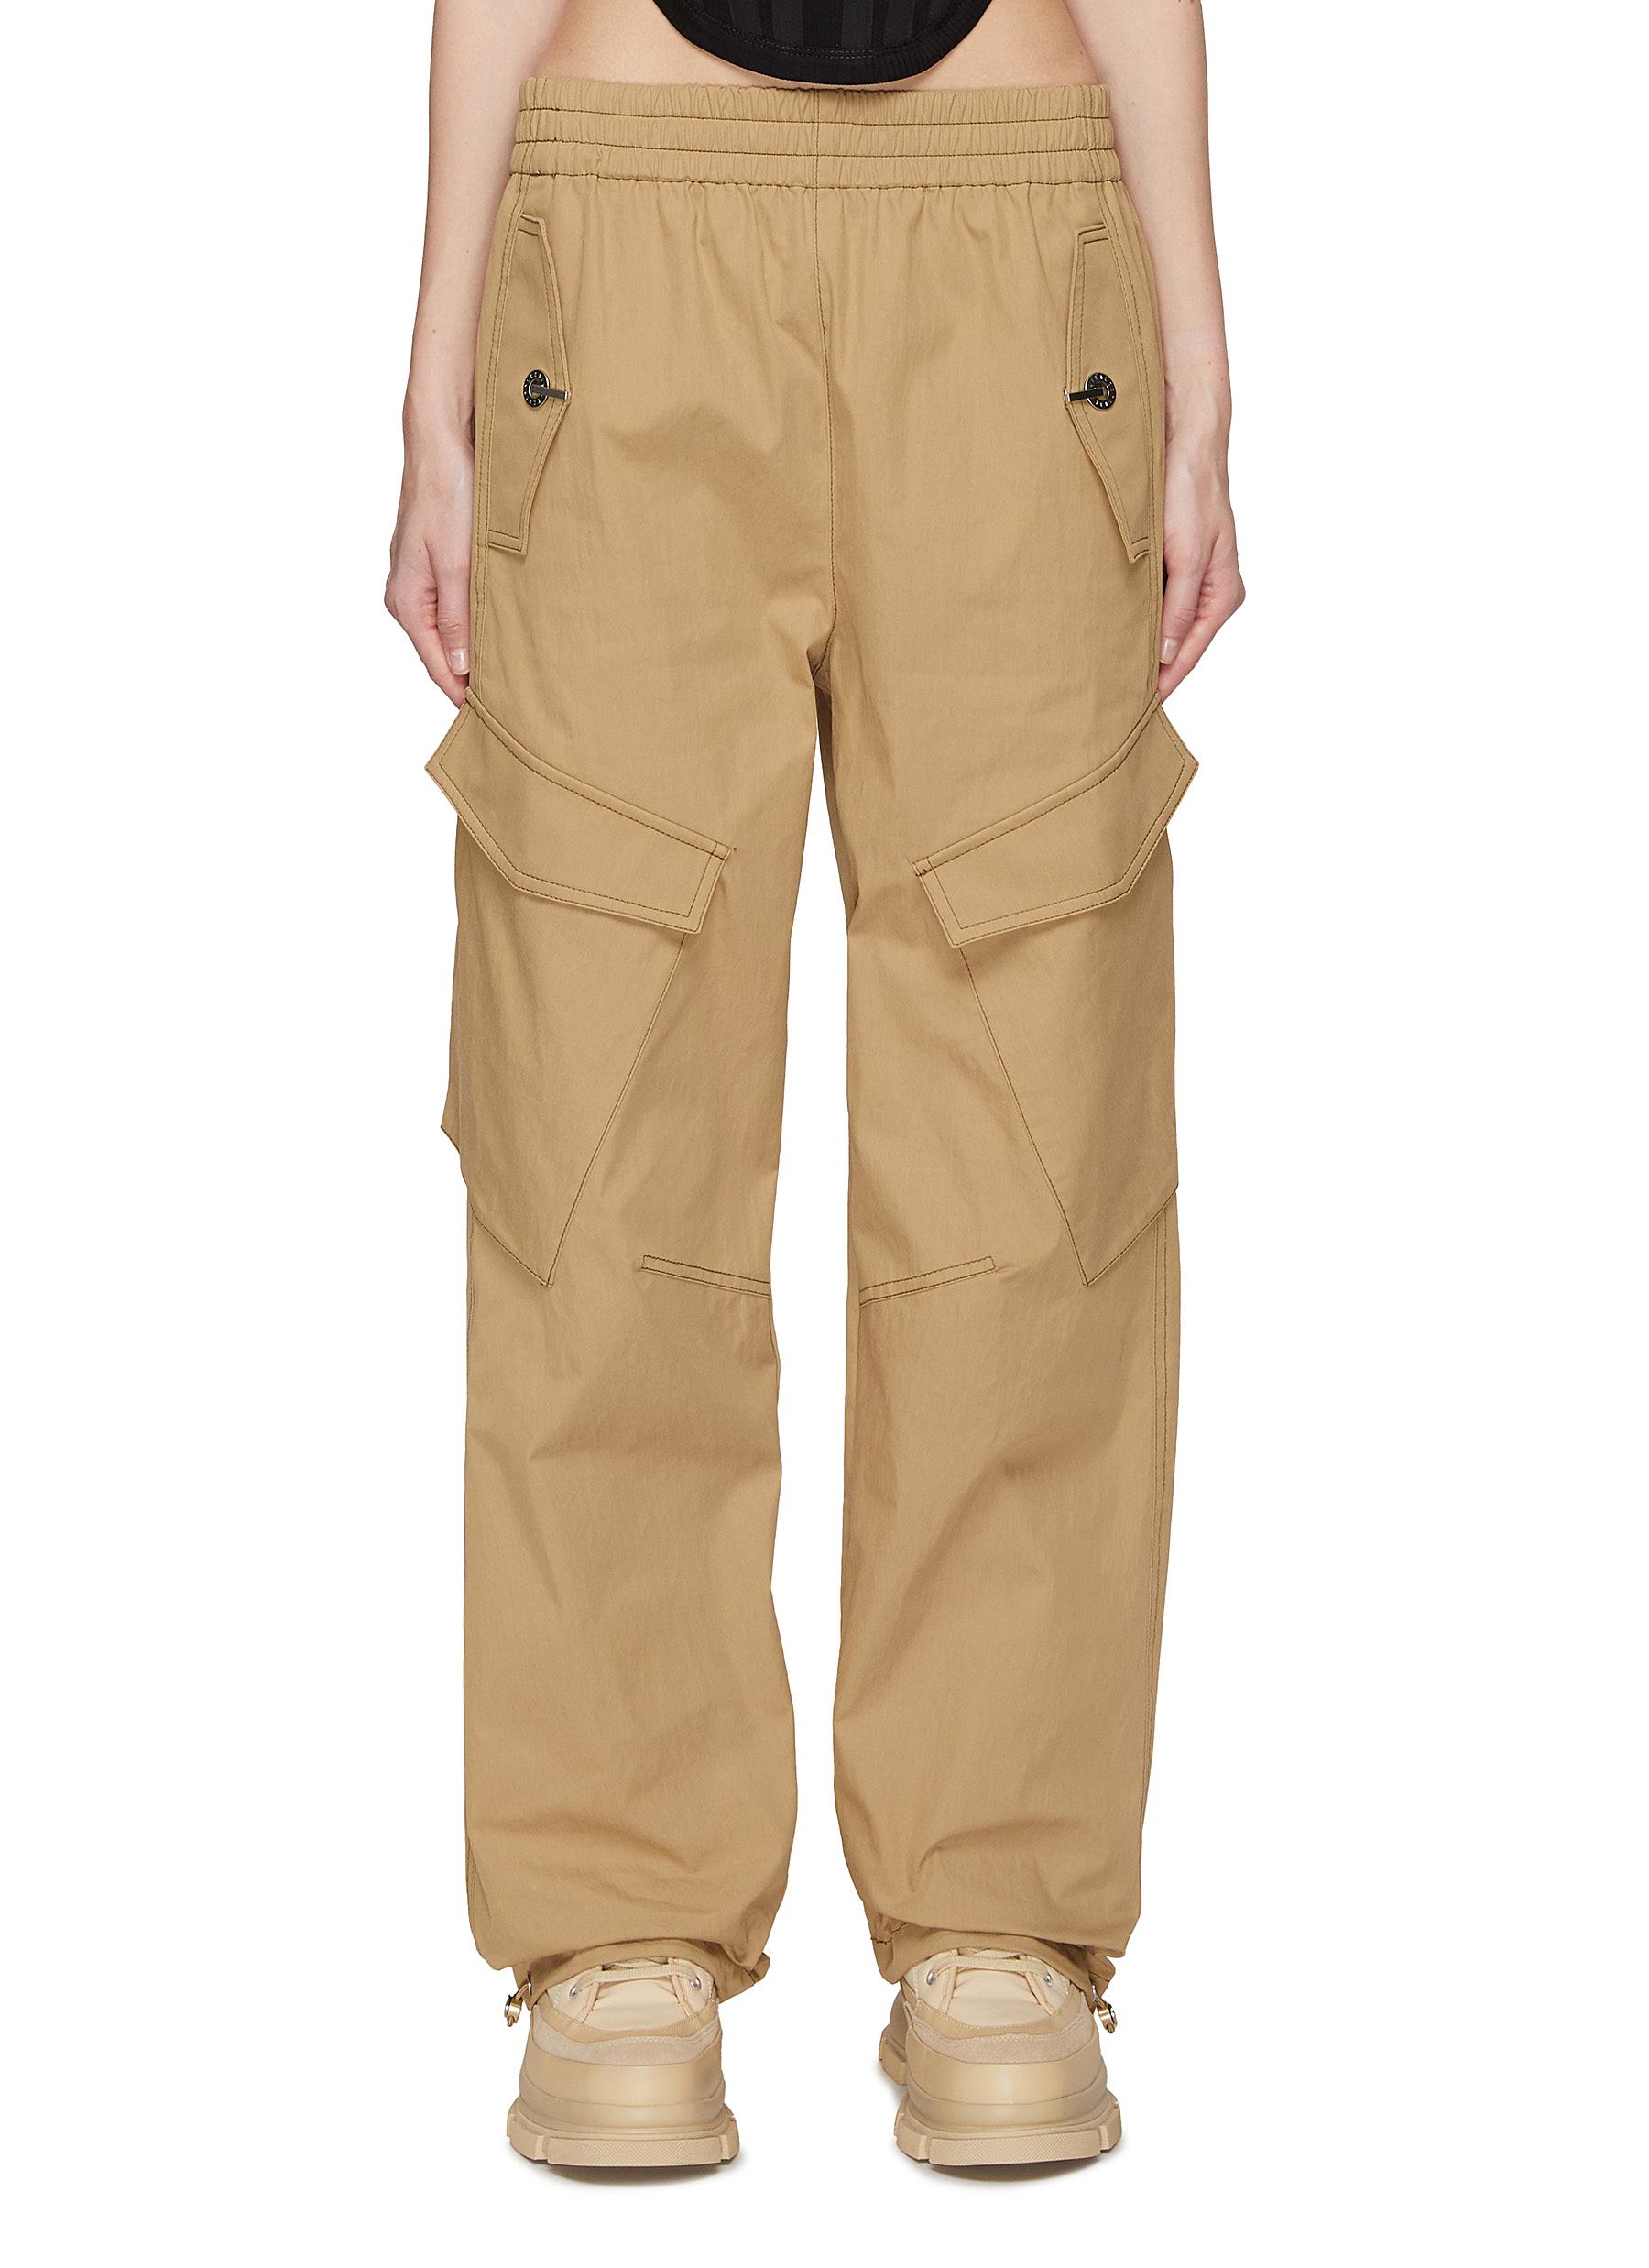 DION LEE ELASTICATED WAIST LOW RISE LATCH CARGO PANTS